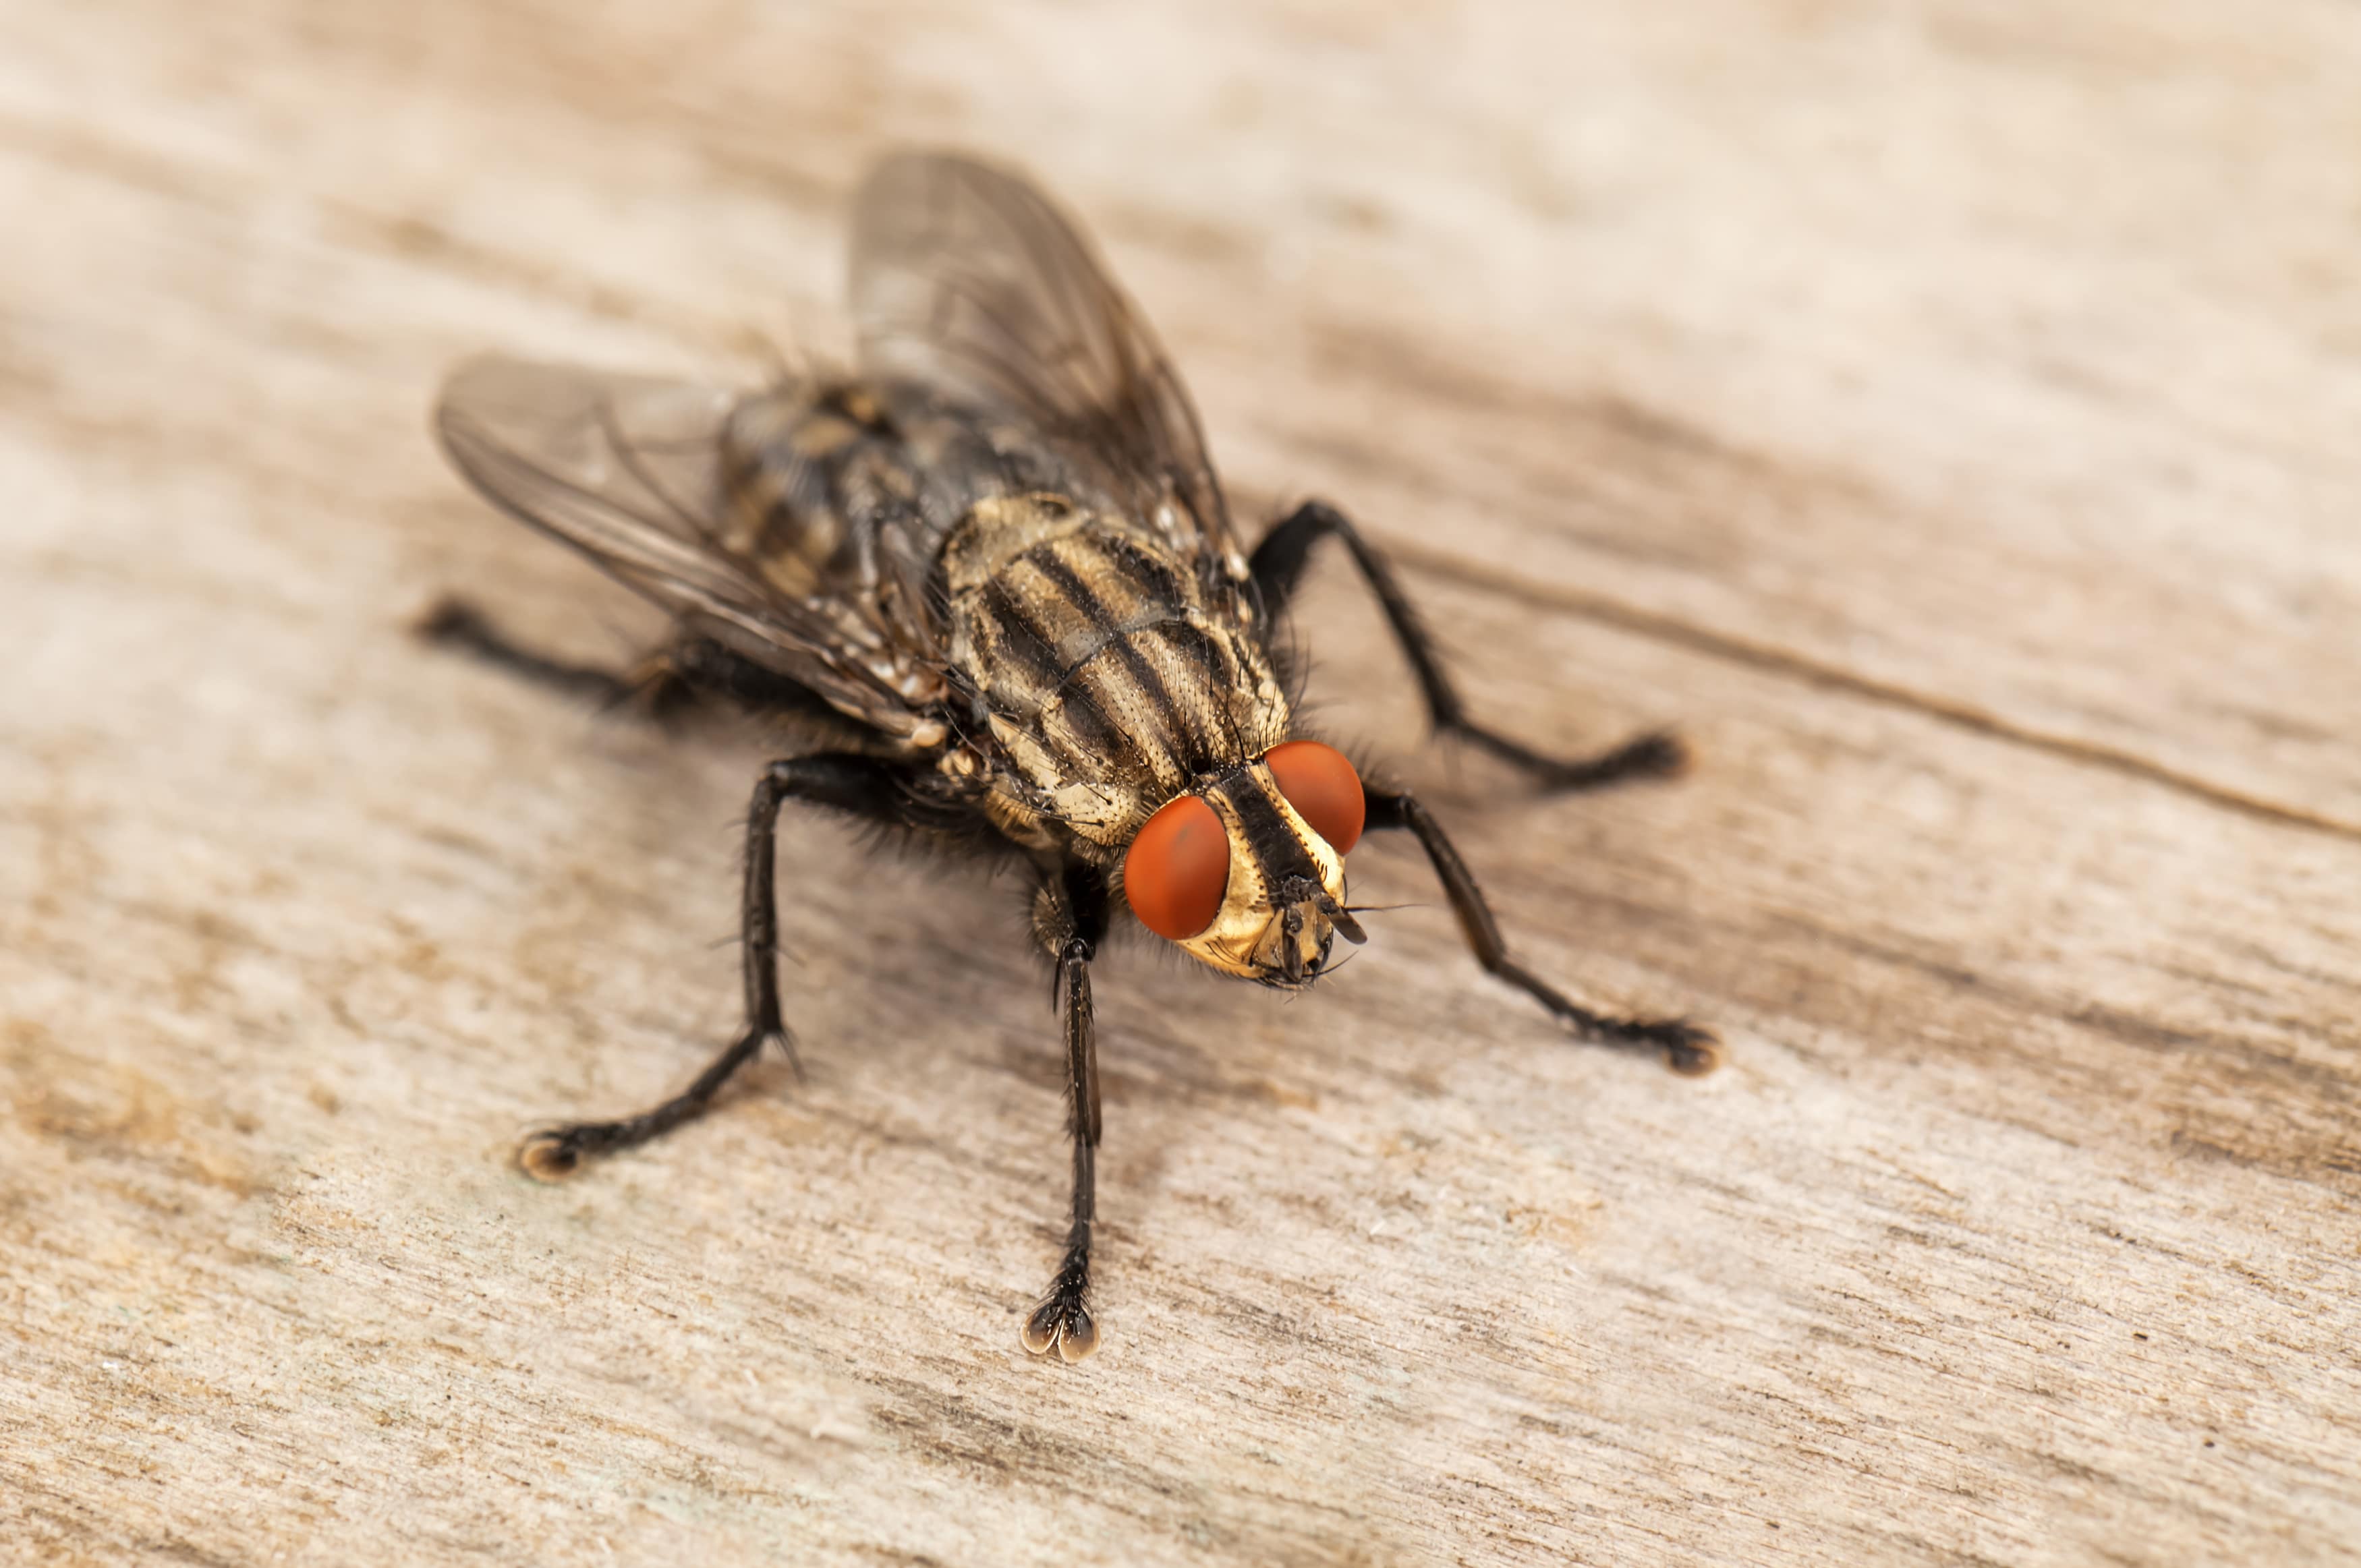 10 Natural Fly Repellents To Help Rid Your Home Of Flies